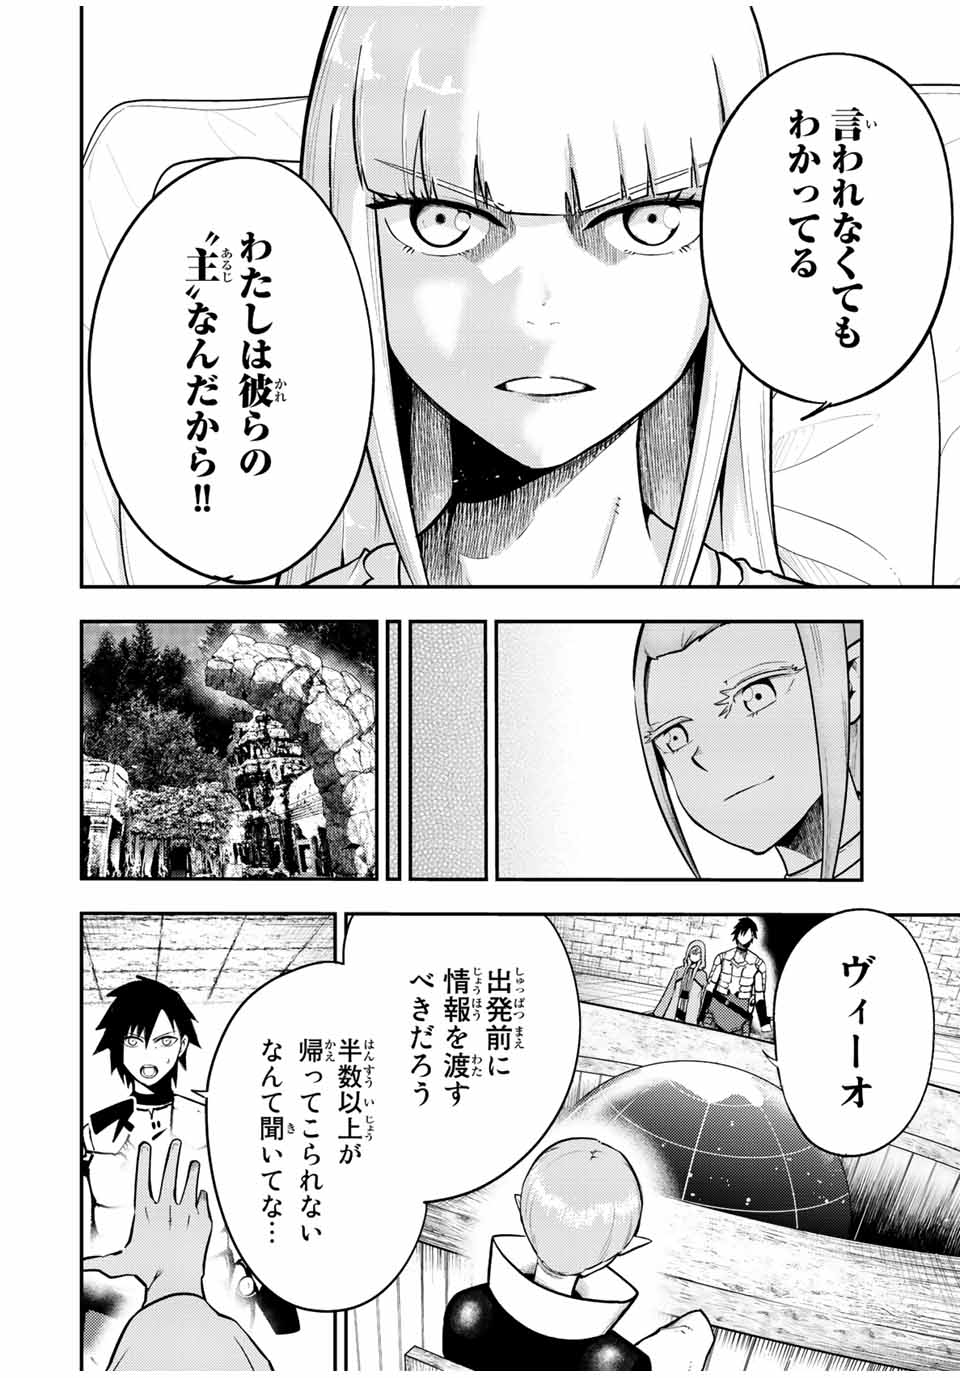 the strongest former prince-; 奴隷転生 ～その奴隷、最強の元王子につき～ 第78話 - Page 18